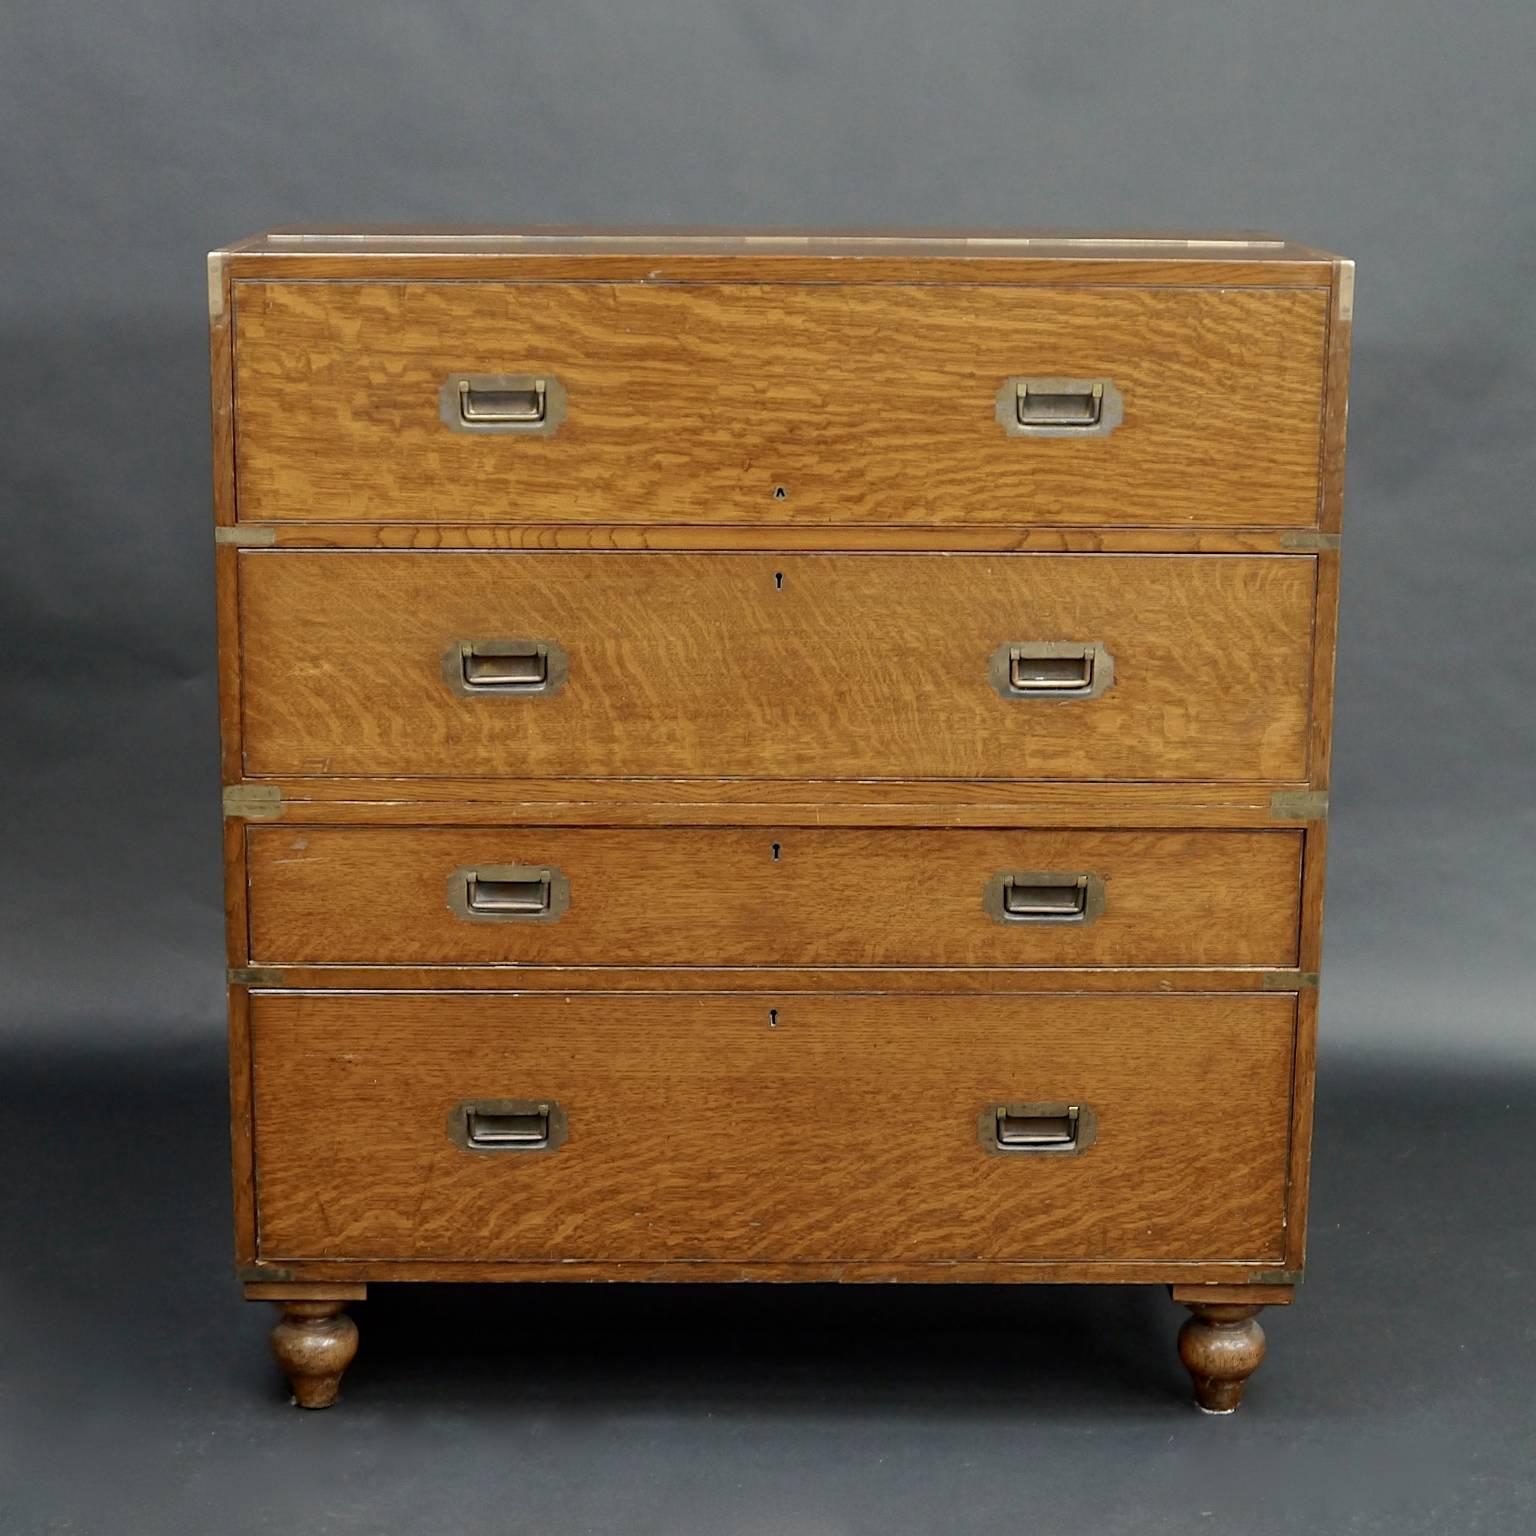 A fantastic two-piece solid oak Campaign chest with recessed brass handles and comprehensive secretaire drawer with slide out desk top and unusual folding mechanism that provides two smaller cupboards to the top. Manufactured and retailed by Army